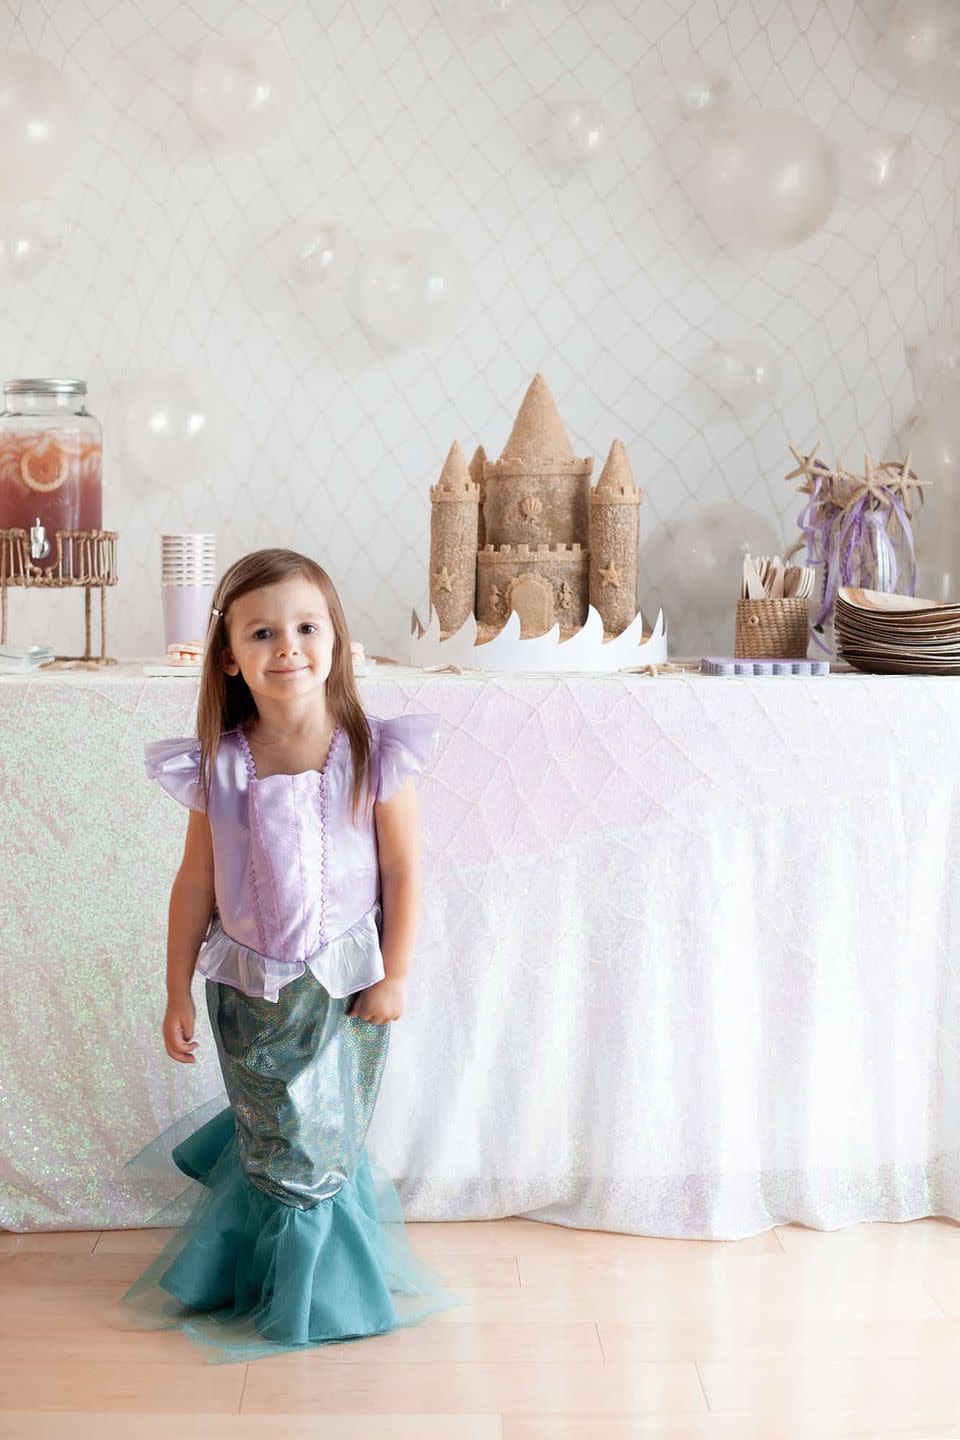 <p>Sandcastles, seashell-shaped plates, and netting used as table décor? Sounds like the makings of a picture-perfect mermaid-themed party to us—and one that will certainly appeal to littles!</p><p><strong>See more at <a href="https://abeautifulmess.com/mermaid-birthday-party/" rel="nofollow noopener" target="_blank" data-ylk="slk:A Beautiful Mess" class="link ">A Beautiful Mess</a>.</strong></p><p><strong><a class="link " href="https://go.redirectingat.com?id=74968X1596630&url=https%3A%2F%2Fwww.walmart.com%2Fsearch%3Fq%3Dmermaid%2Bplates%26typeahead%3Dmermaid%2Bplates&sref=https%3A%2F%2Fwww.thepioneerwoman.com%2Fhome-lifestyle%2Fentertaining%2Fg41021040%2Fbest-party-themes%2F" rel="nofollow noopener" target="_blank" data-ylk="slk:SHOP MERMAID PLATES">SHOP MERMAID PLATES</a><br></strong></p>